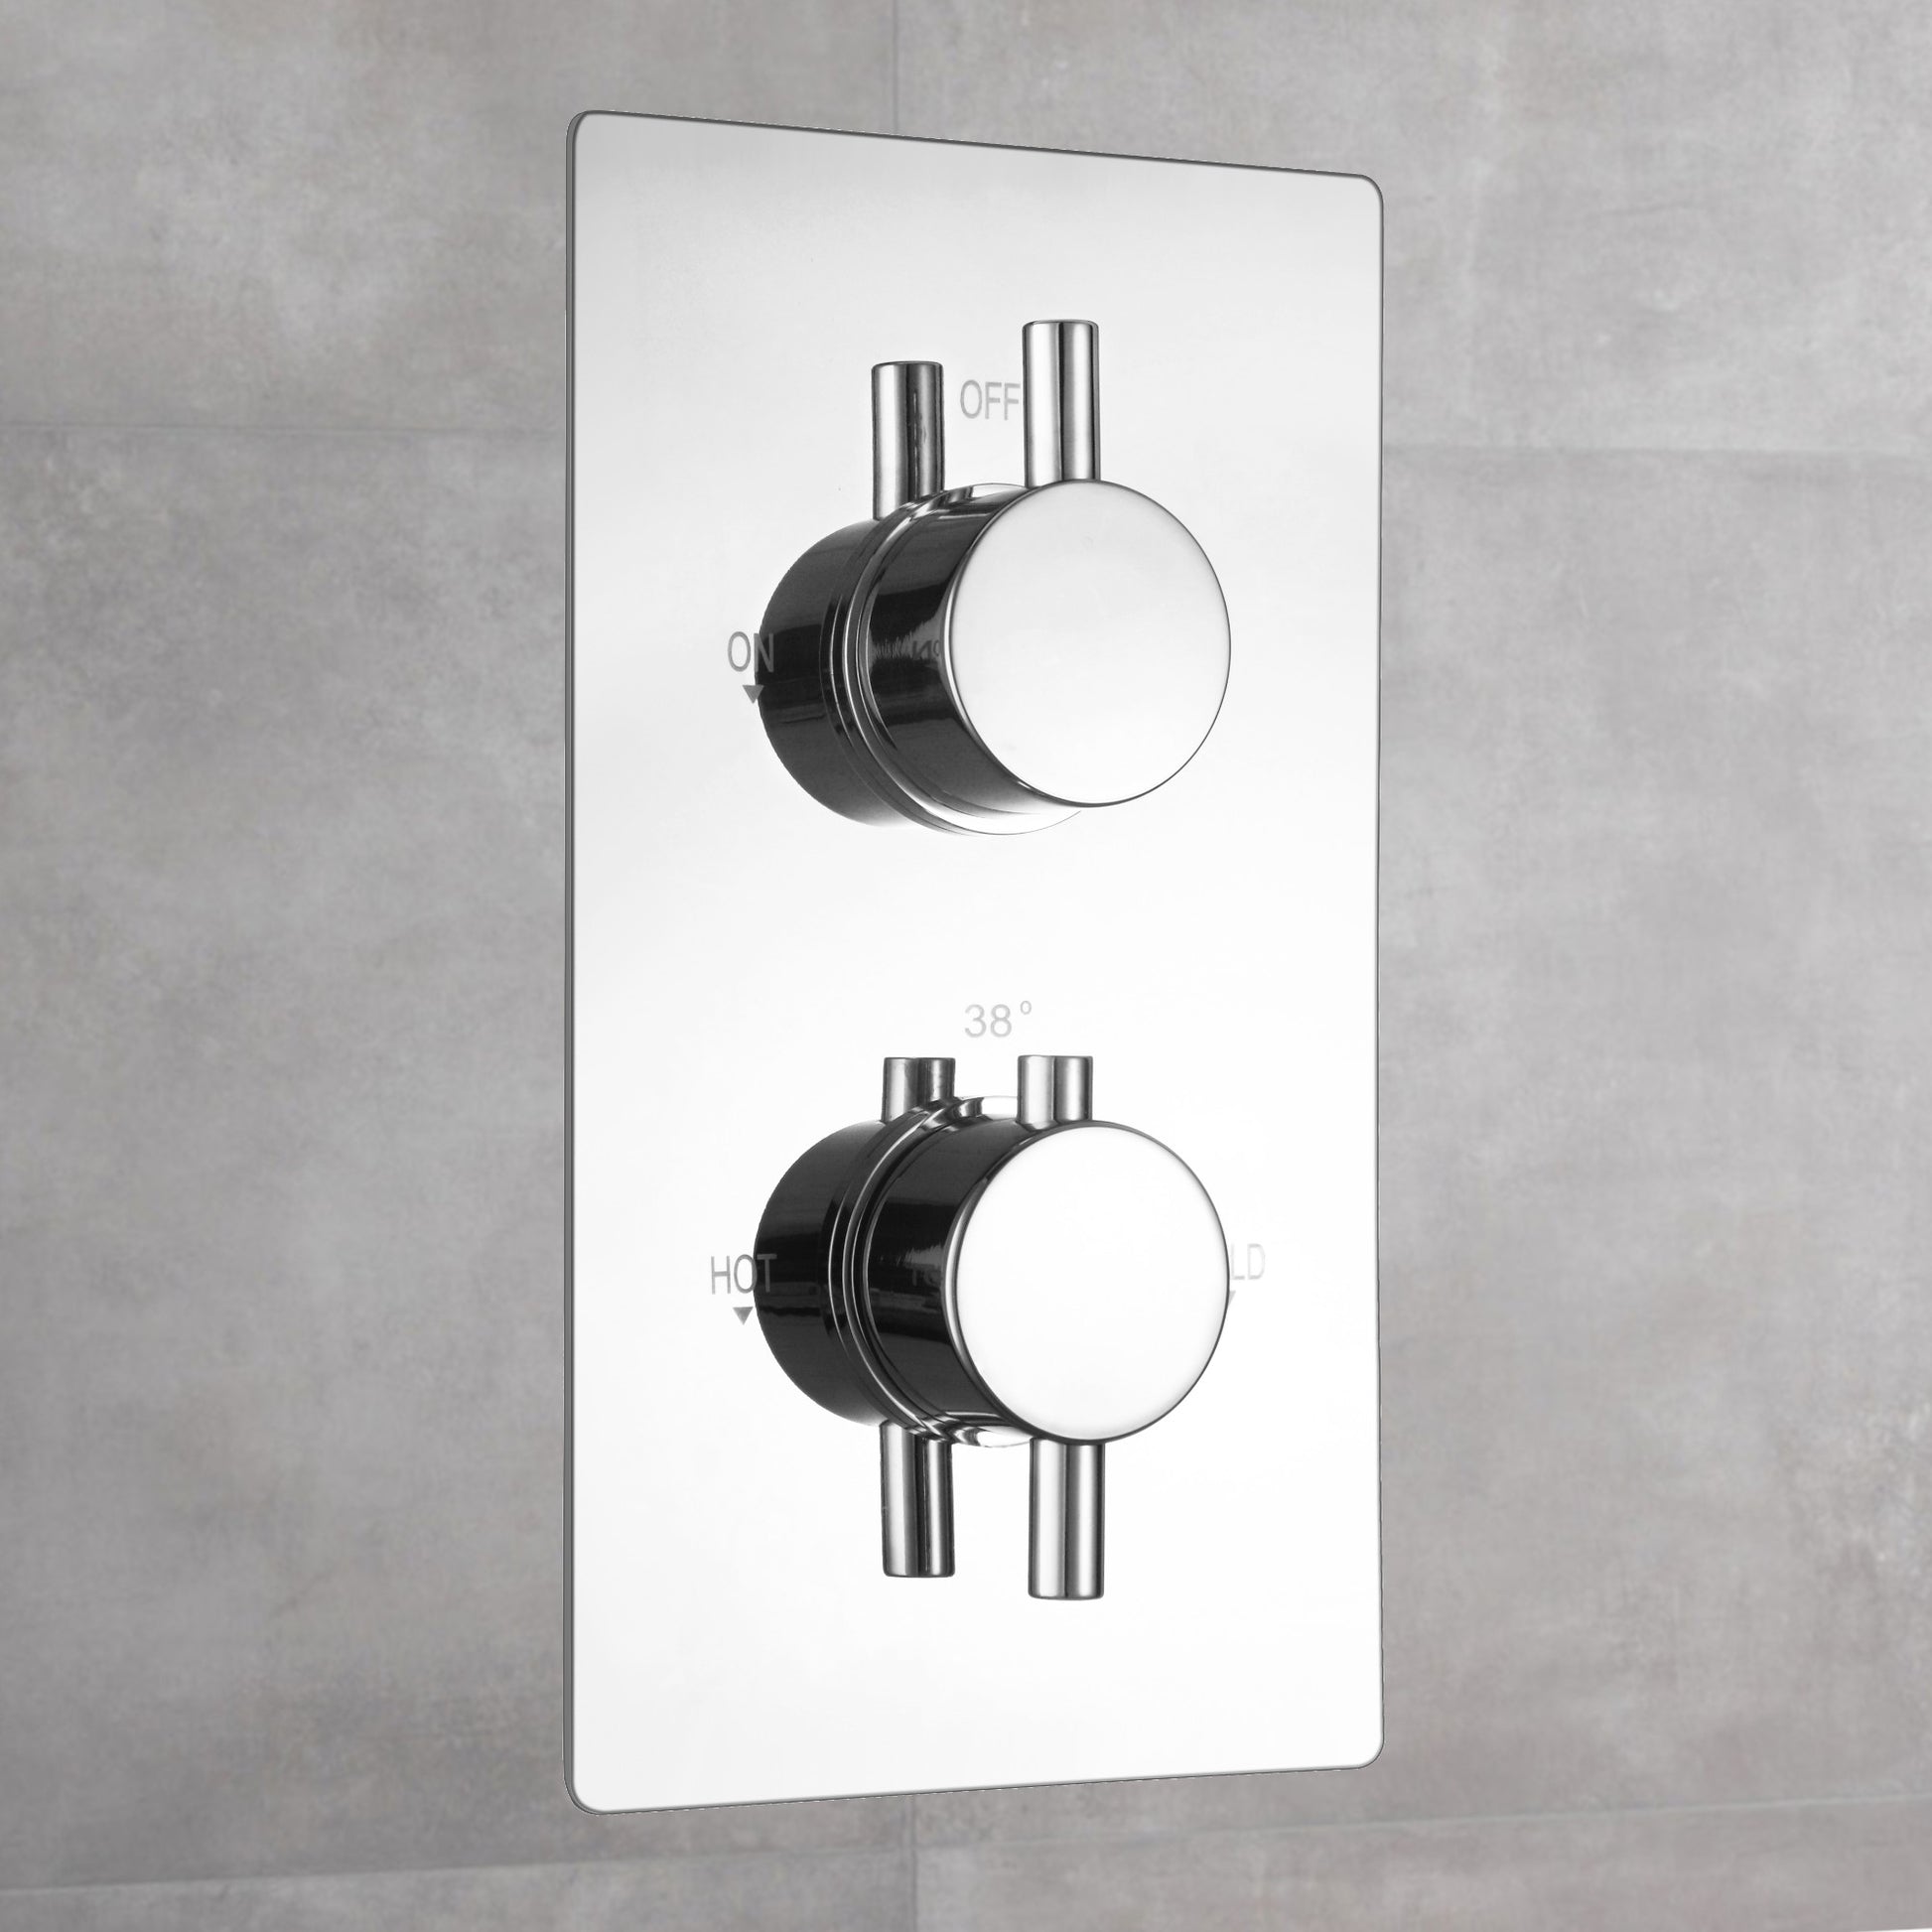 Venice contemporary round concealed thermostatic twin shower valve with 2 outlets - chrome - Showers